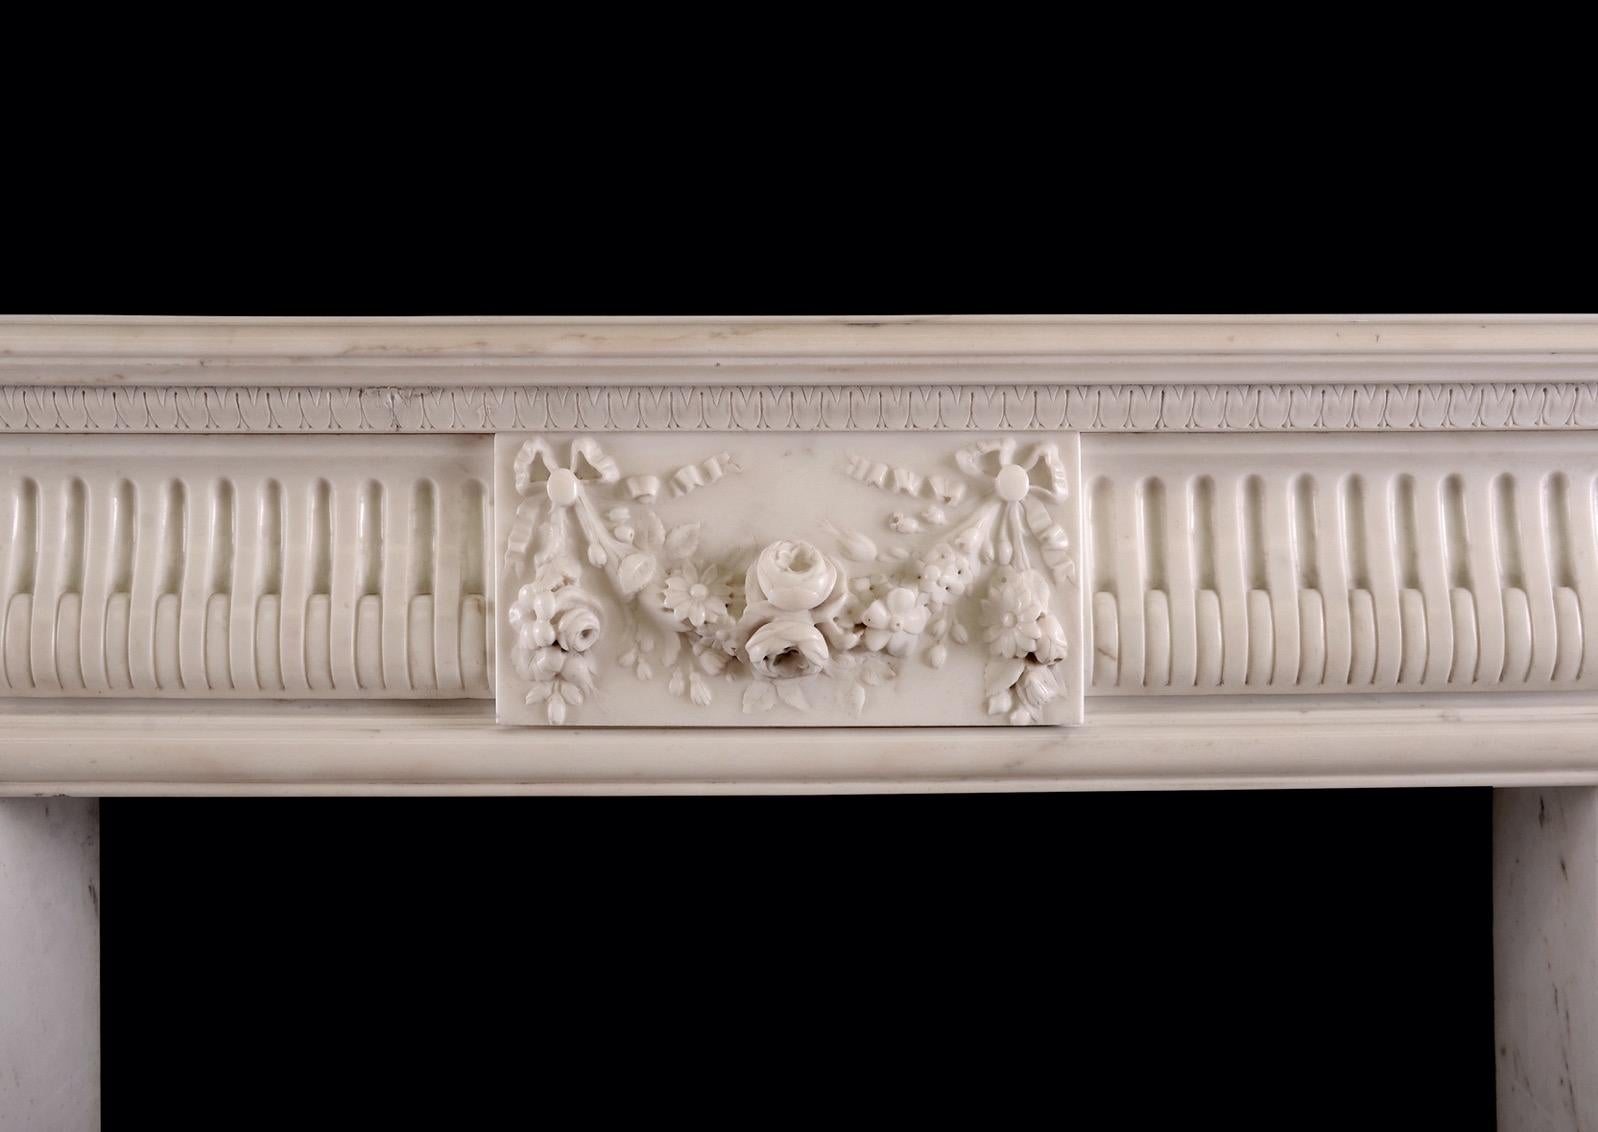 A delicate French Louis XVI style fireplace in white Statuary marble. The stop-fluted jambs surmounted by square carved paterae. The shaped frieze with centre block featuring finely carved swags of flowers and foliage. The shaped, moulded shelf with